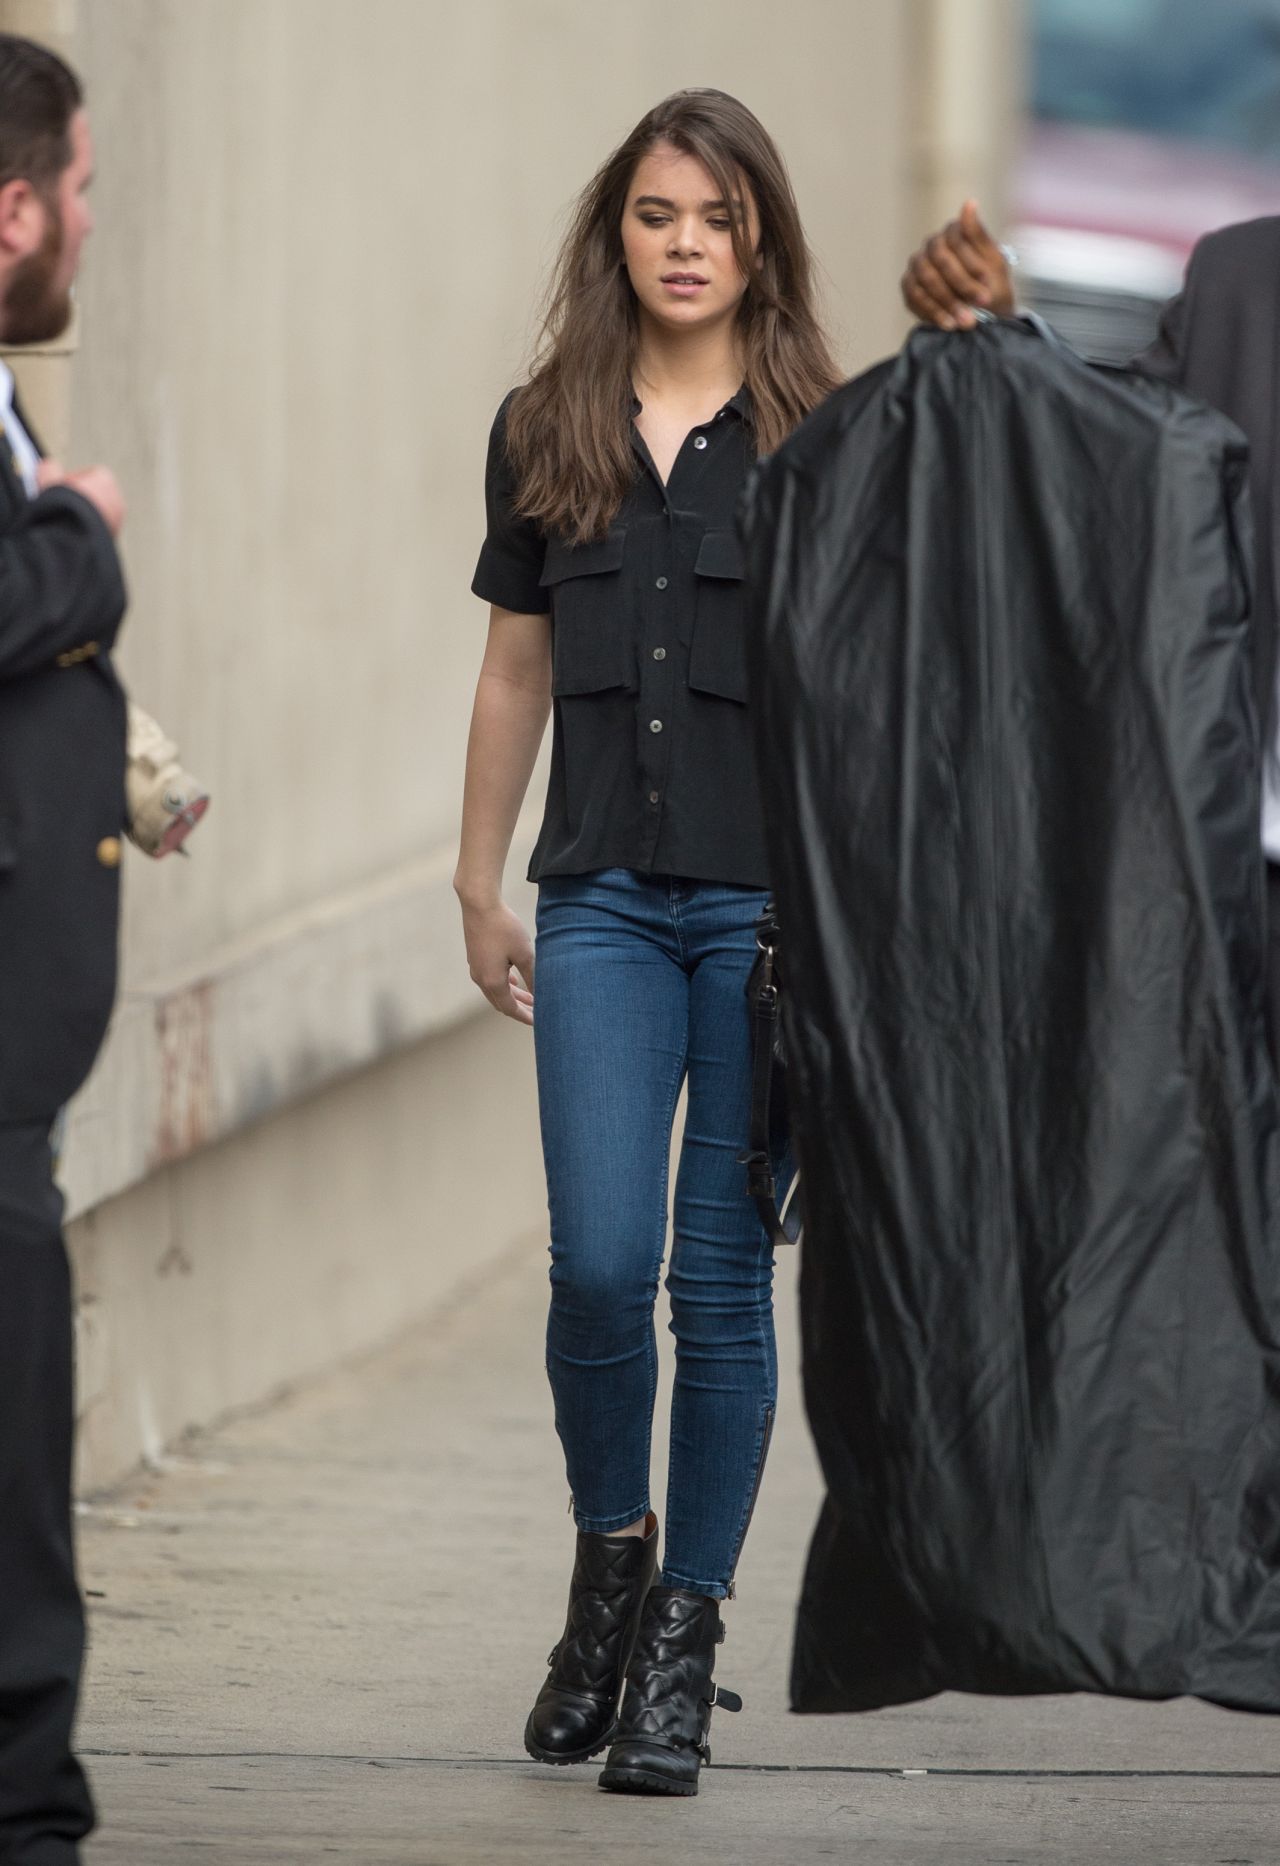 Hailee Steinfeld - Arriving and Leaving Jimmy Kimmel Live, May 2015 ...